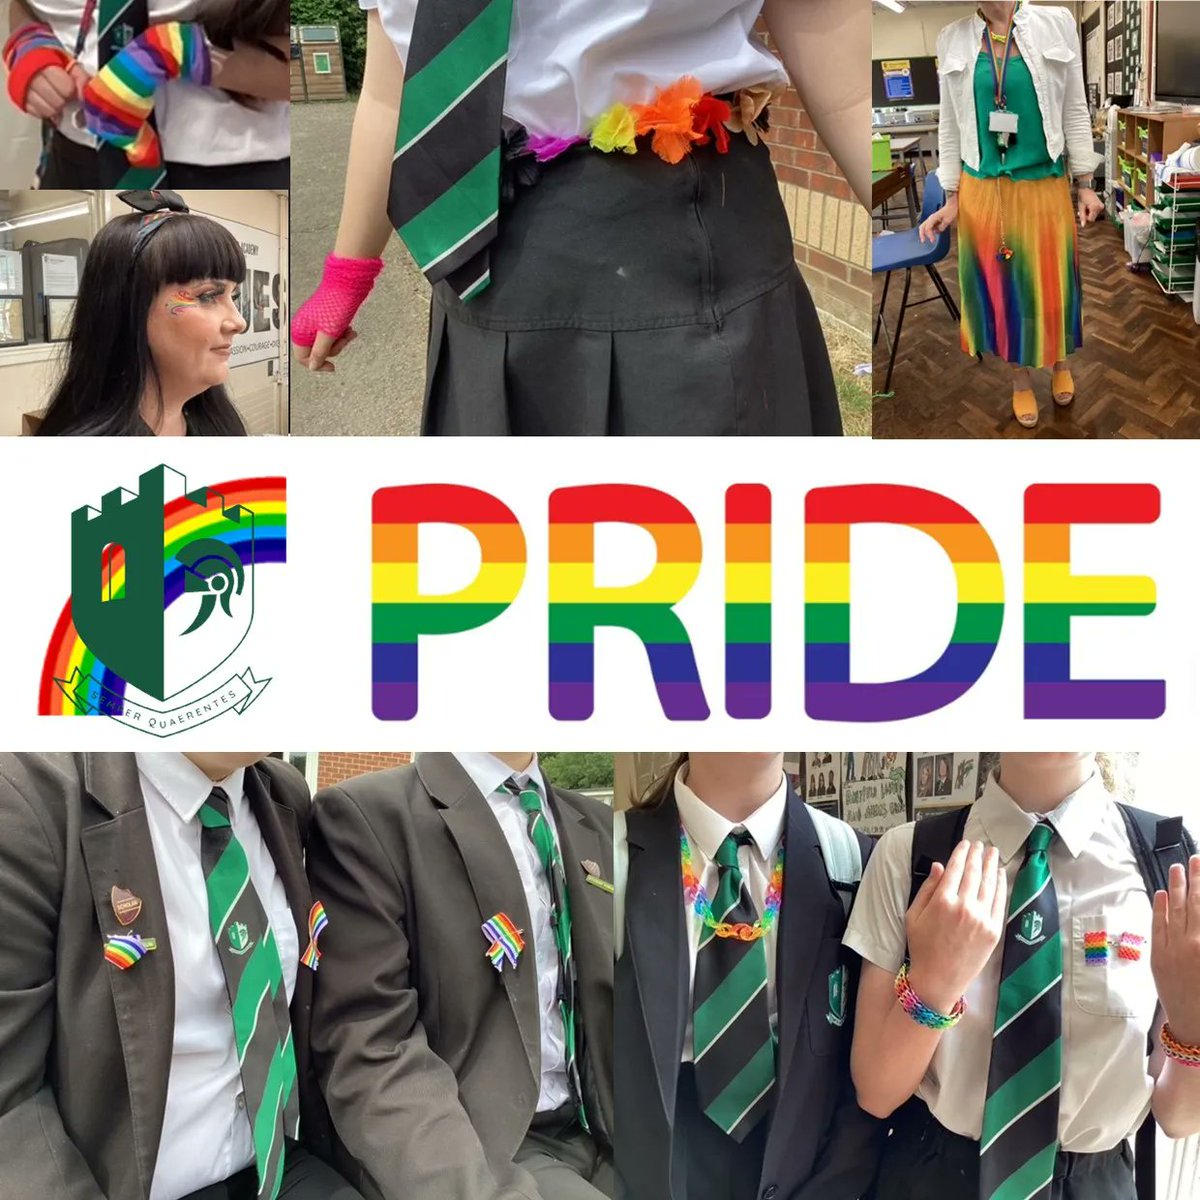 The Adeyfield Academy students and staff have had the opportunity to support and celebrate Pride Month today by wearing rainbow accessories to school. Students have also lead themed assemblies on kindness, equality and respect for others. #pridemonth #respect #studentleadership